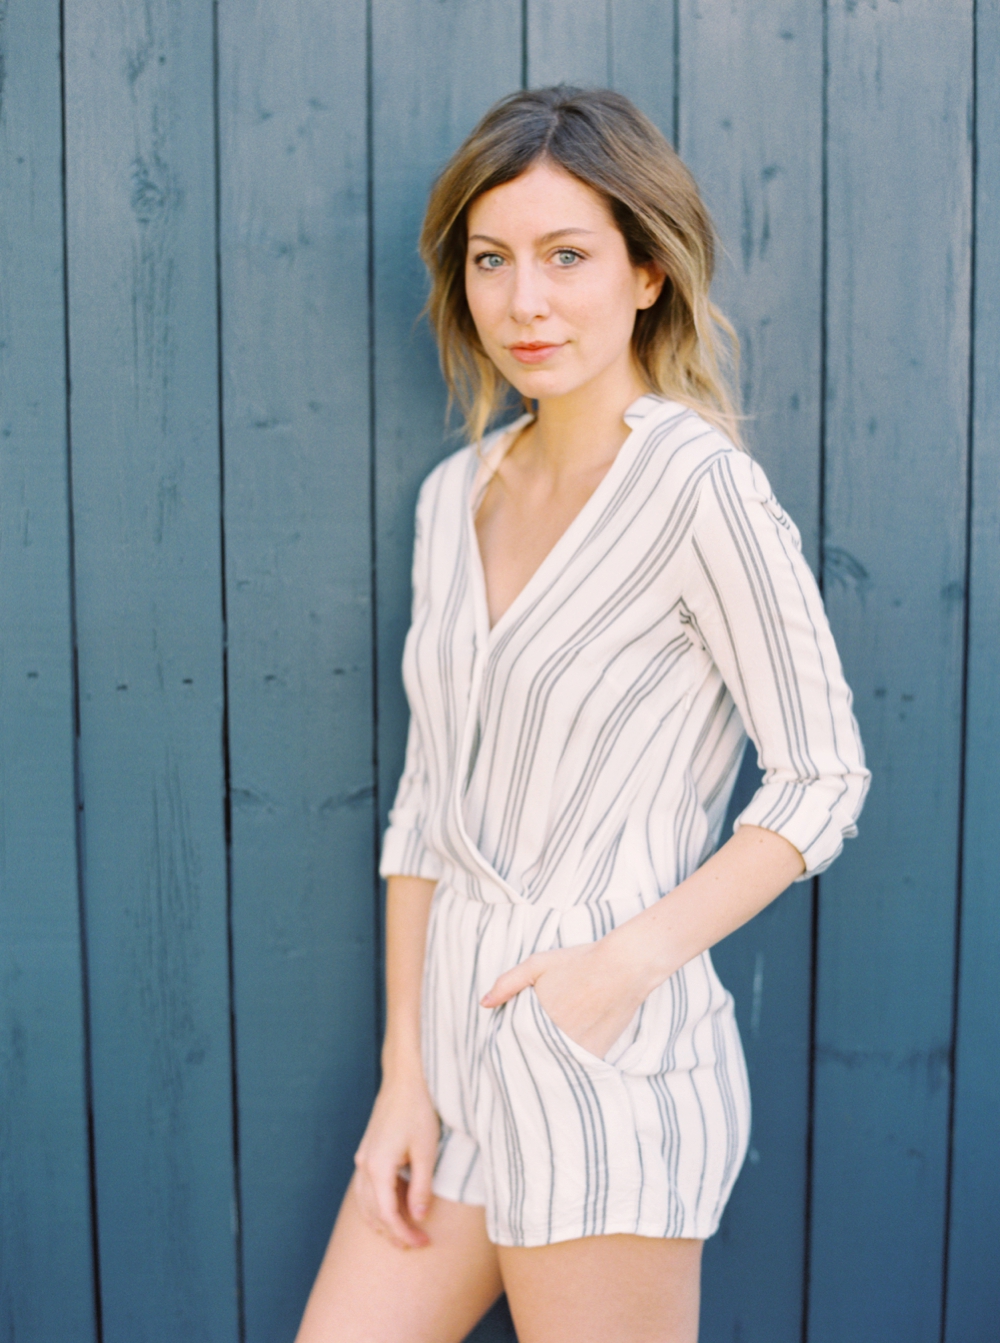 Brittany Messner Life Set Sail | Calgary Fashion Photographers & Local Influencers